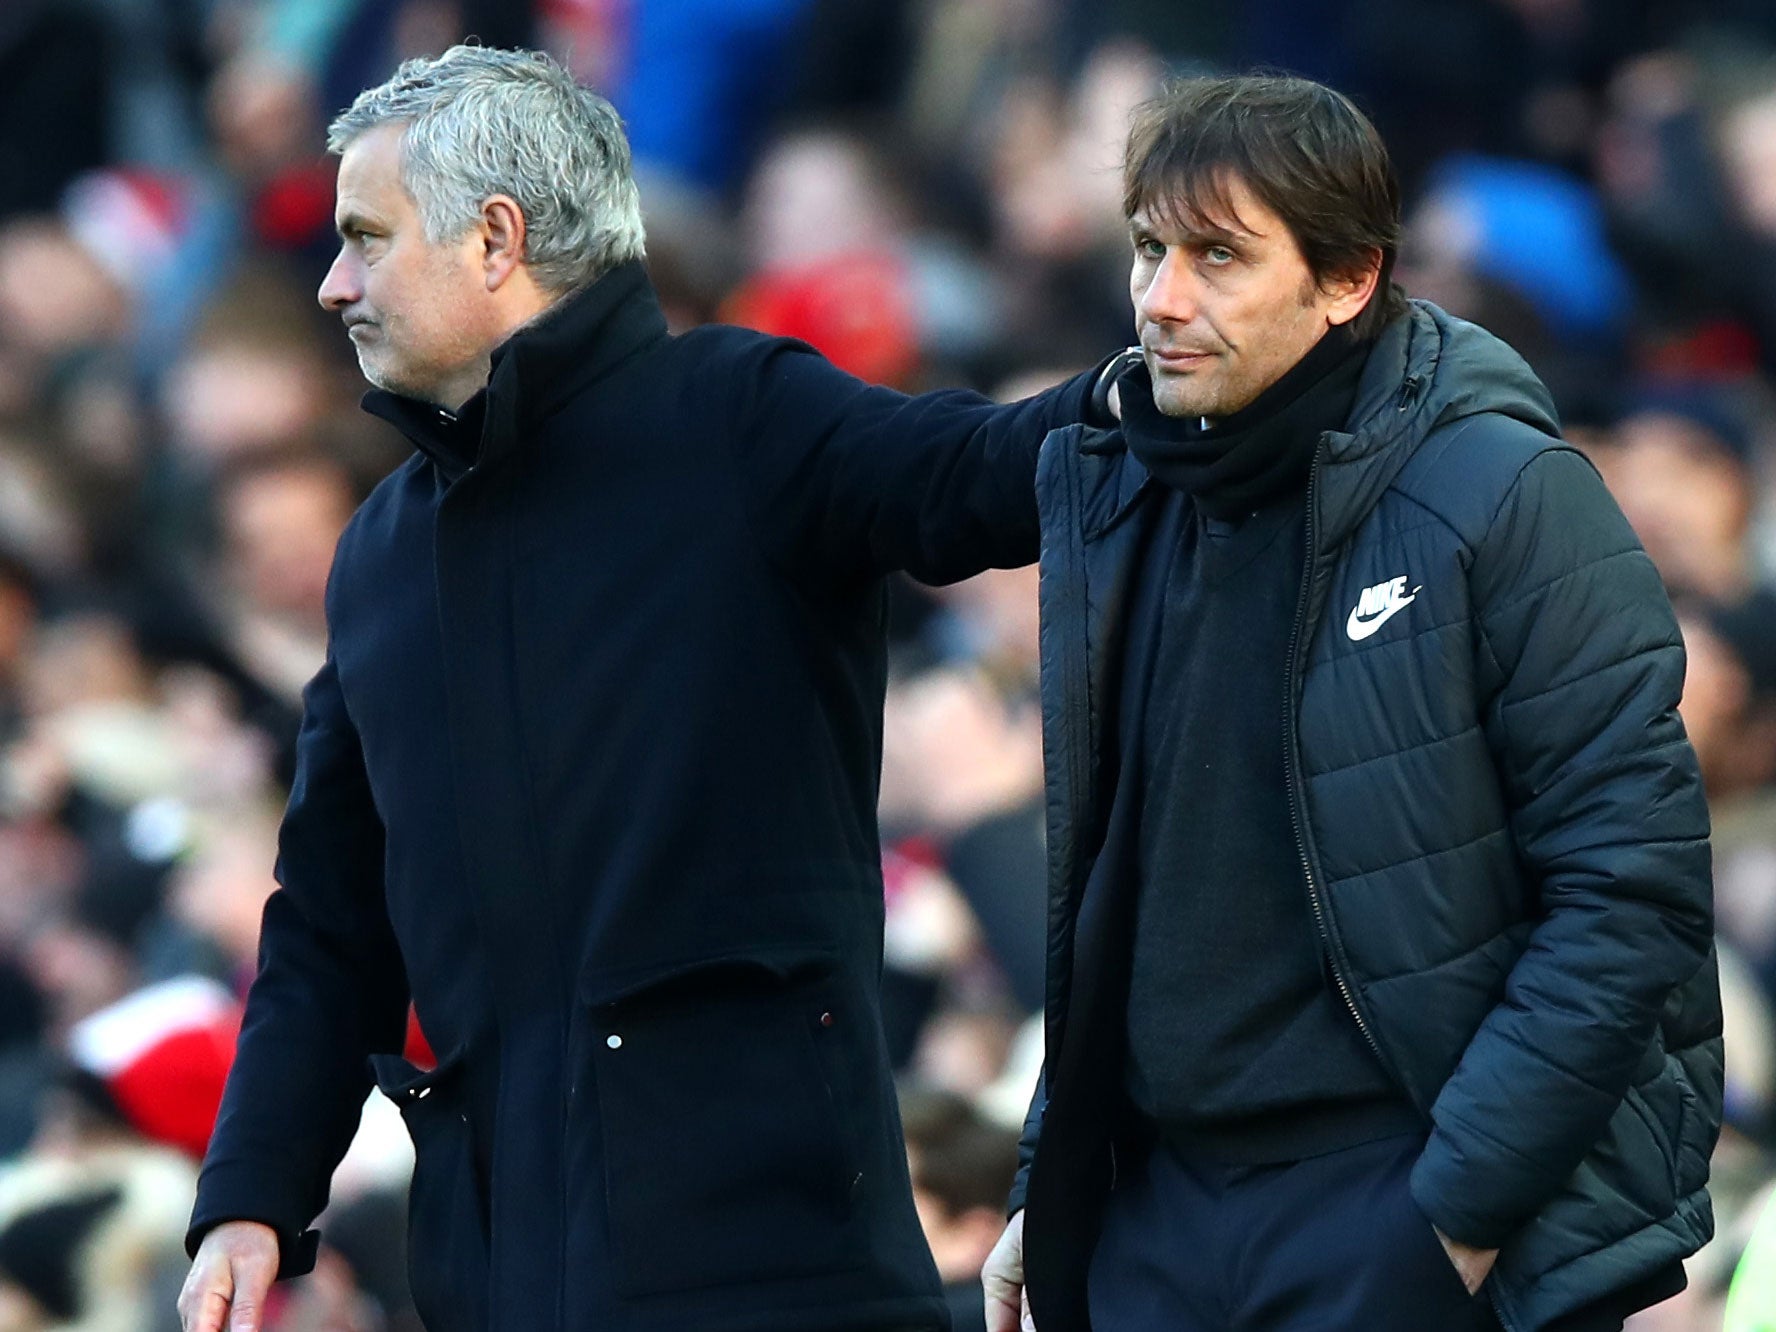 Jose Mourinho and Antonio Conte greeted each other before kick-off